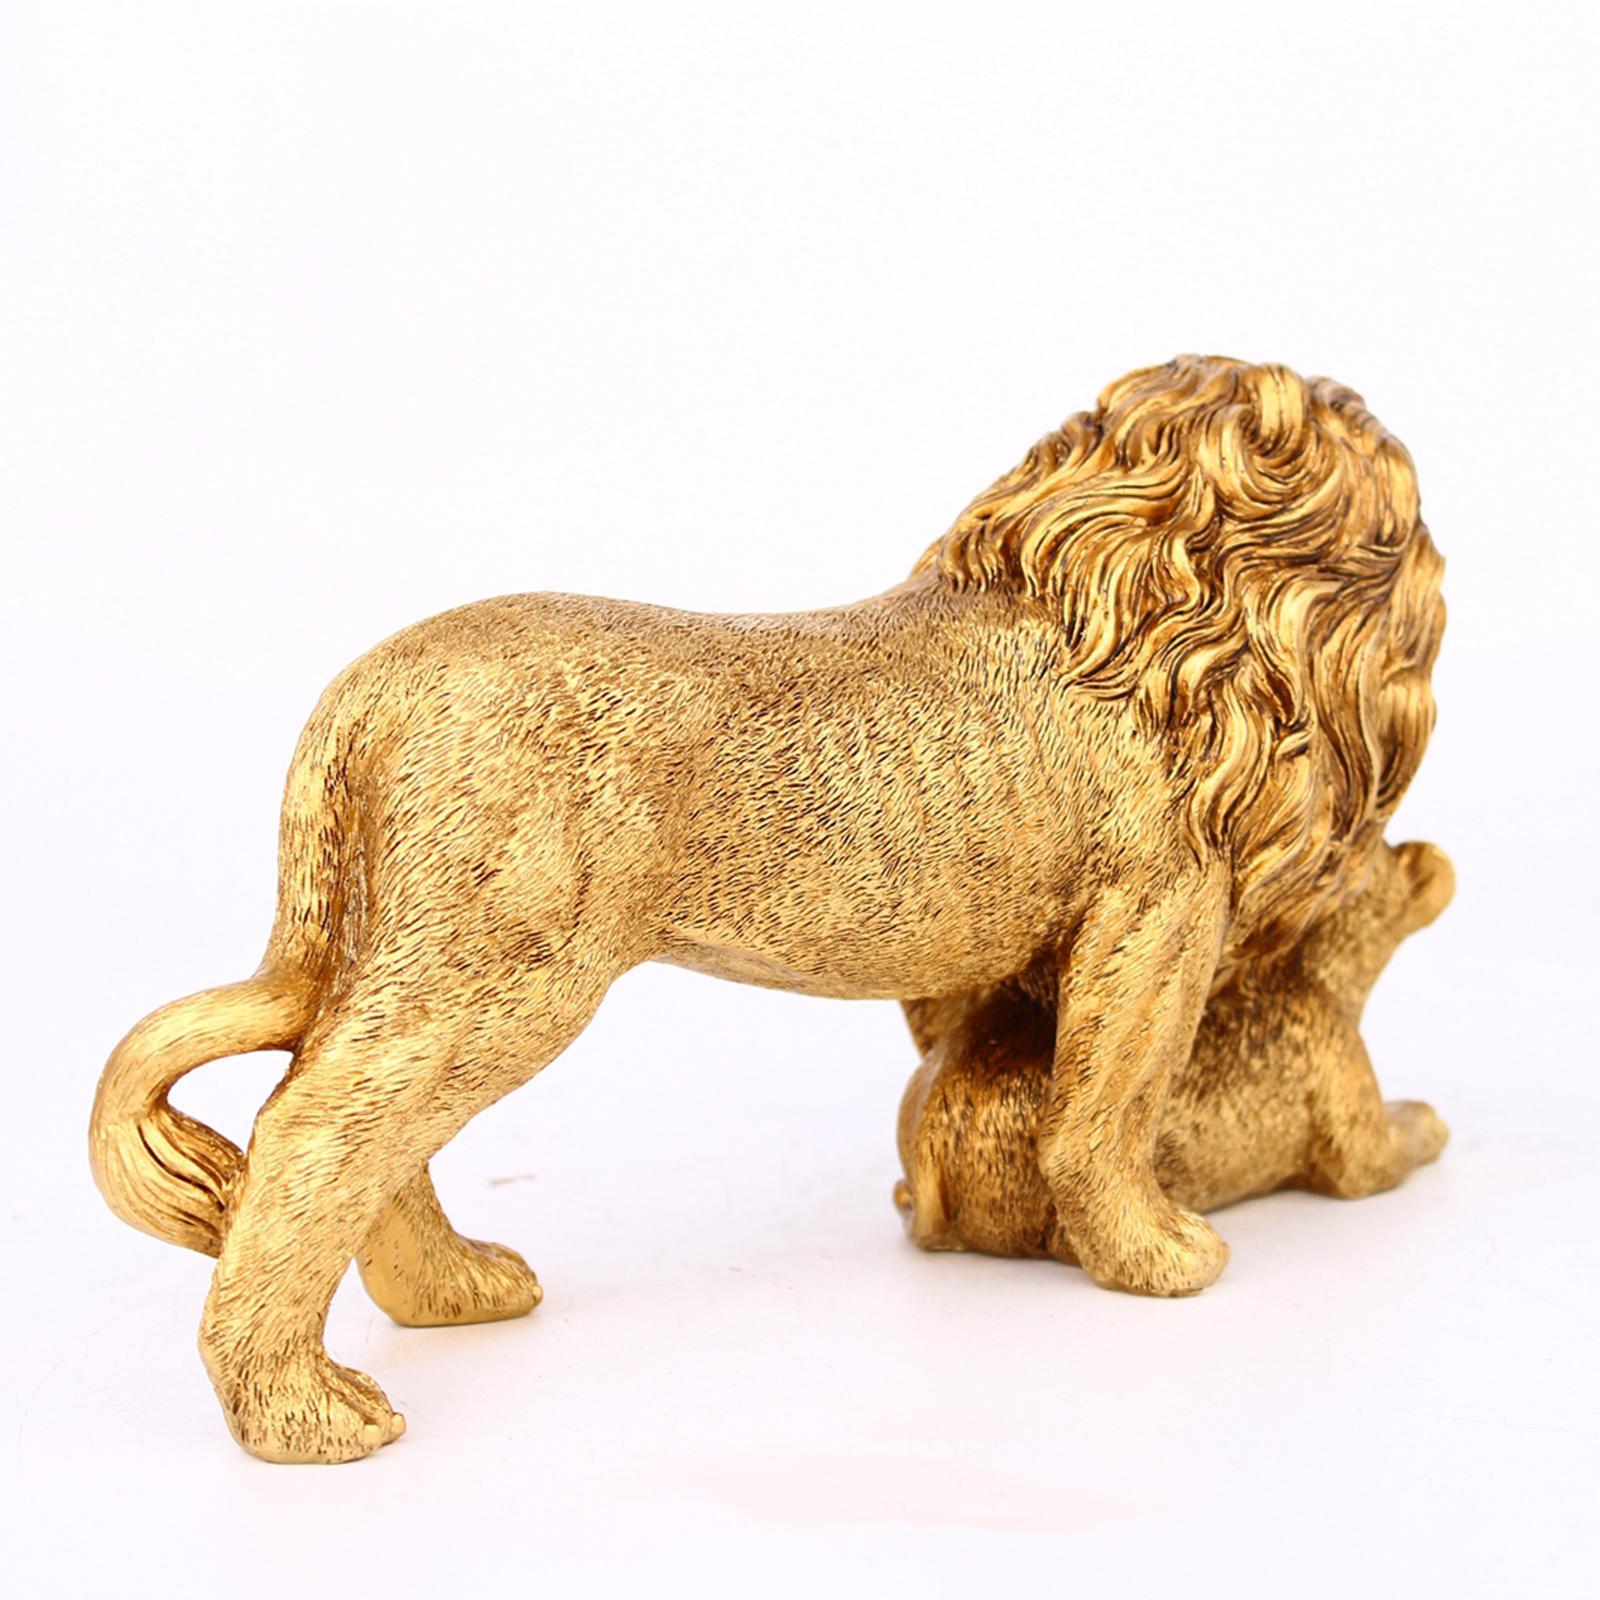 Lion Statue Creative Gifts Art Decor Animals Sculpture for Table Top Cabinet Home